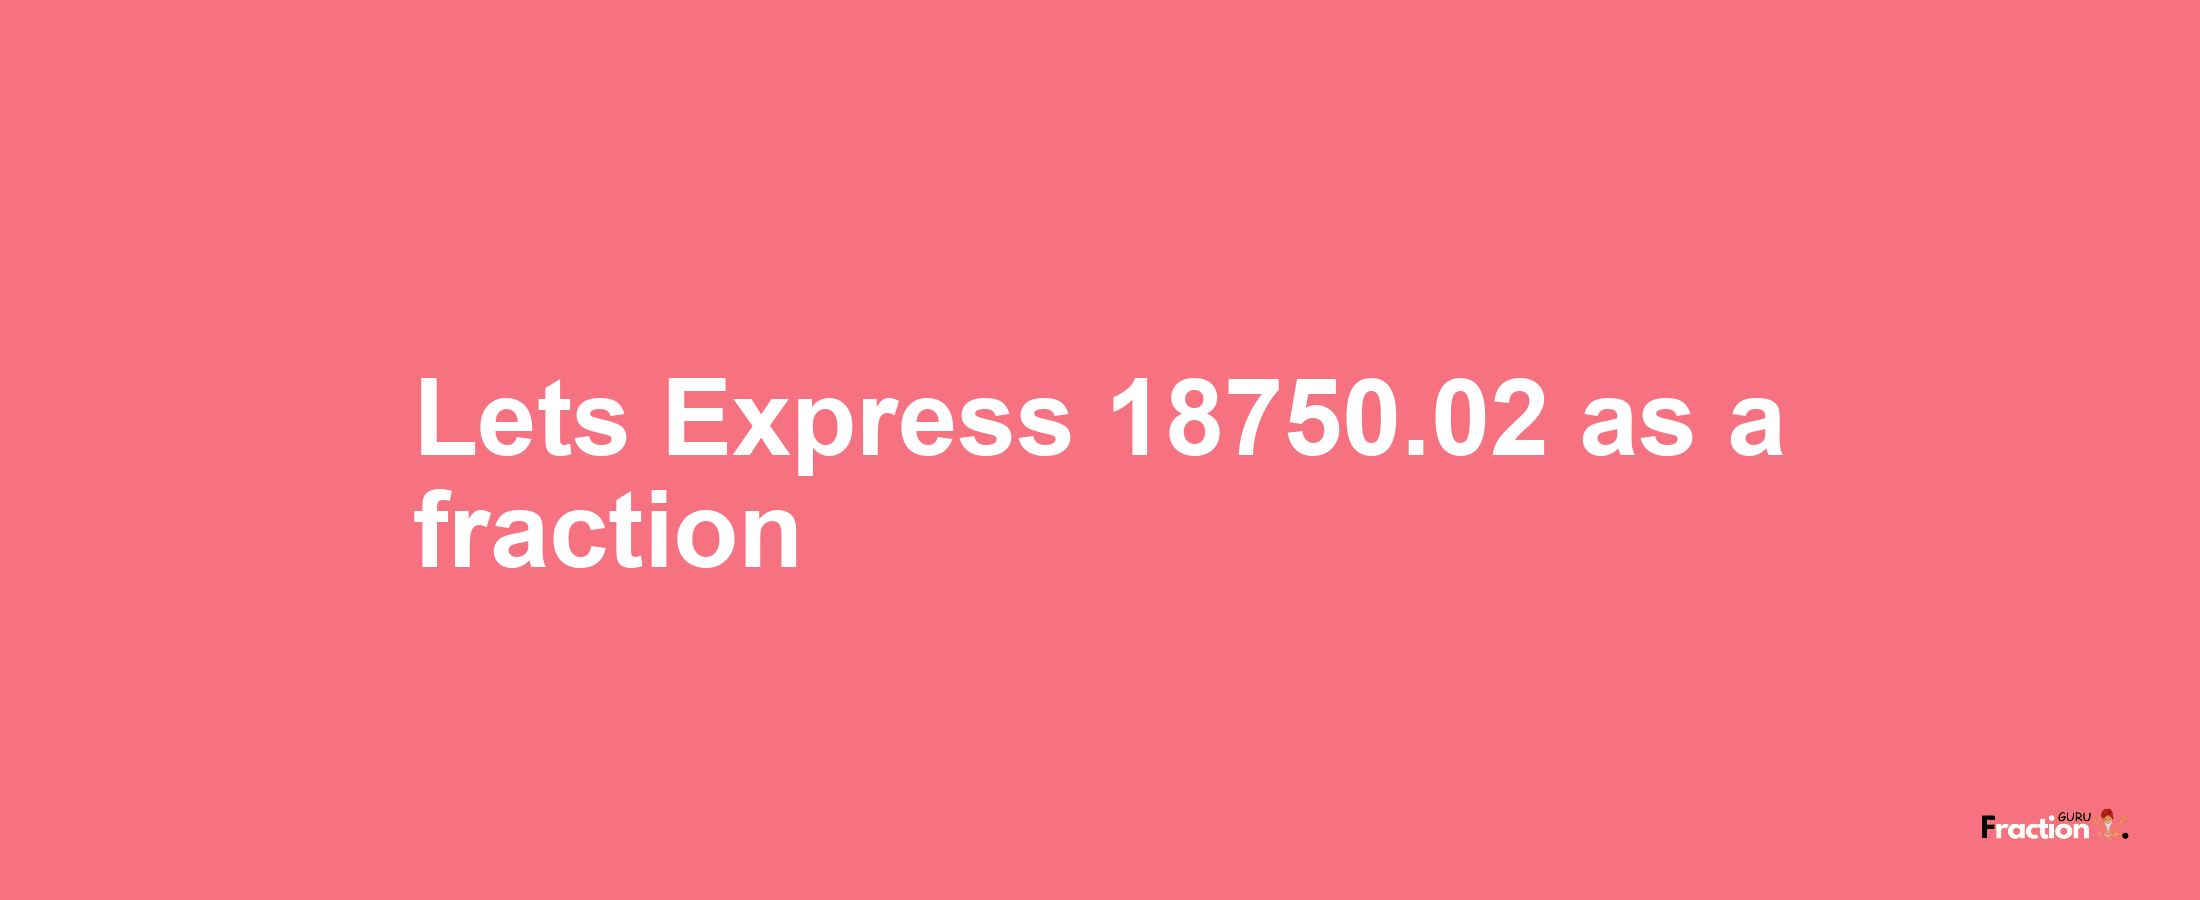 Lets Express 18750.02 as afraction